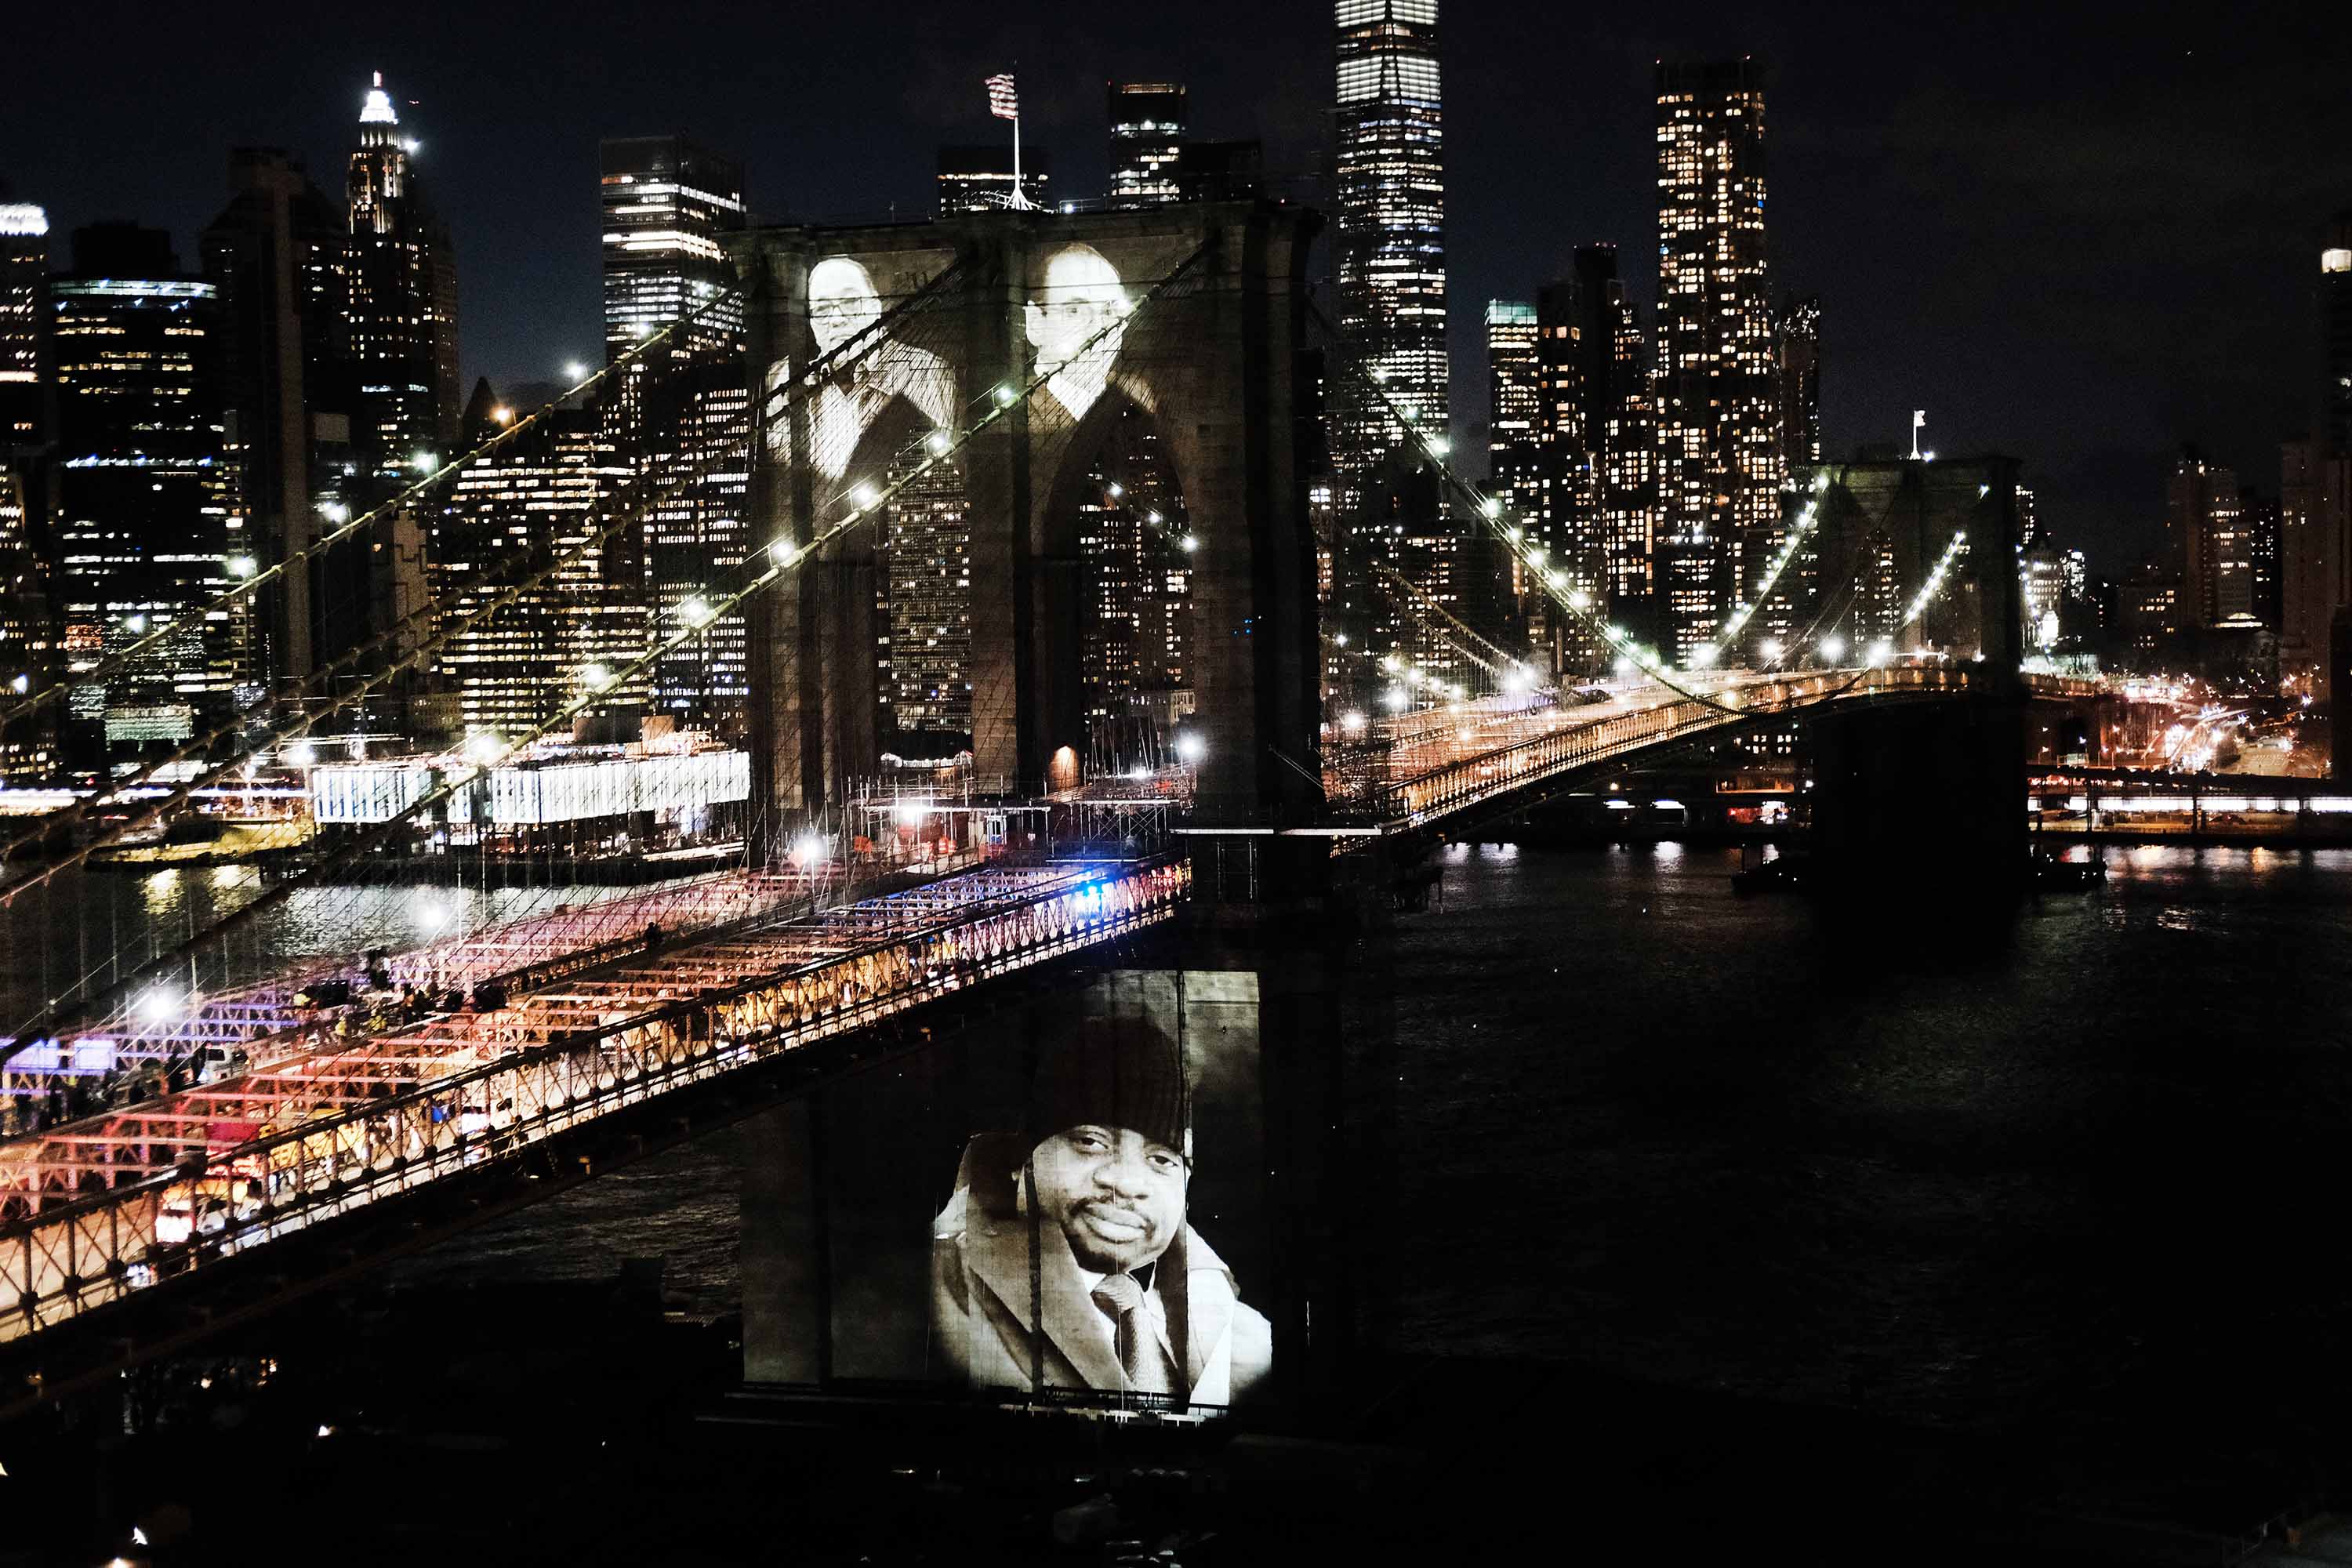 Faces of victims of COVID-19 are projected onto the Brooklyn Bridge during “A COVID-19 Day of Remembrance” memorial service on March 14, in New York City. 